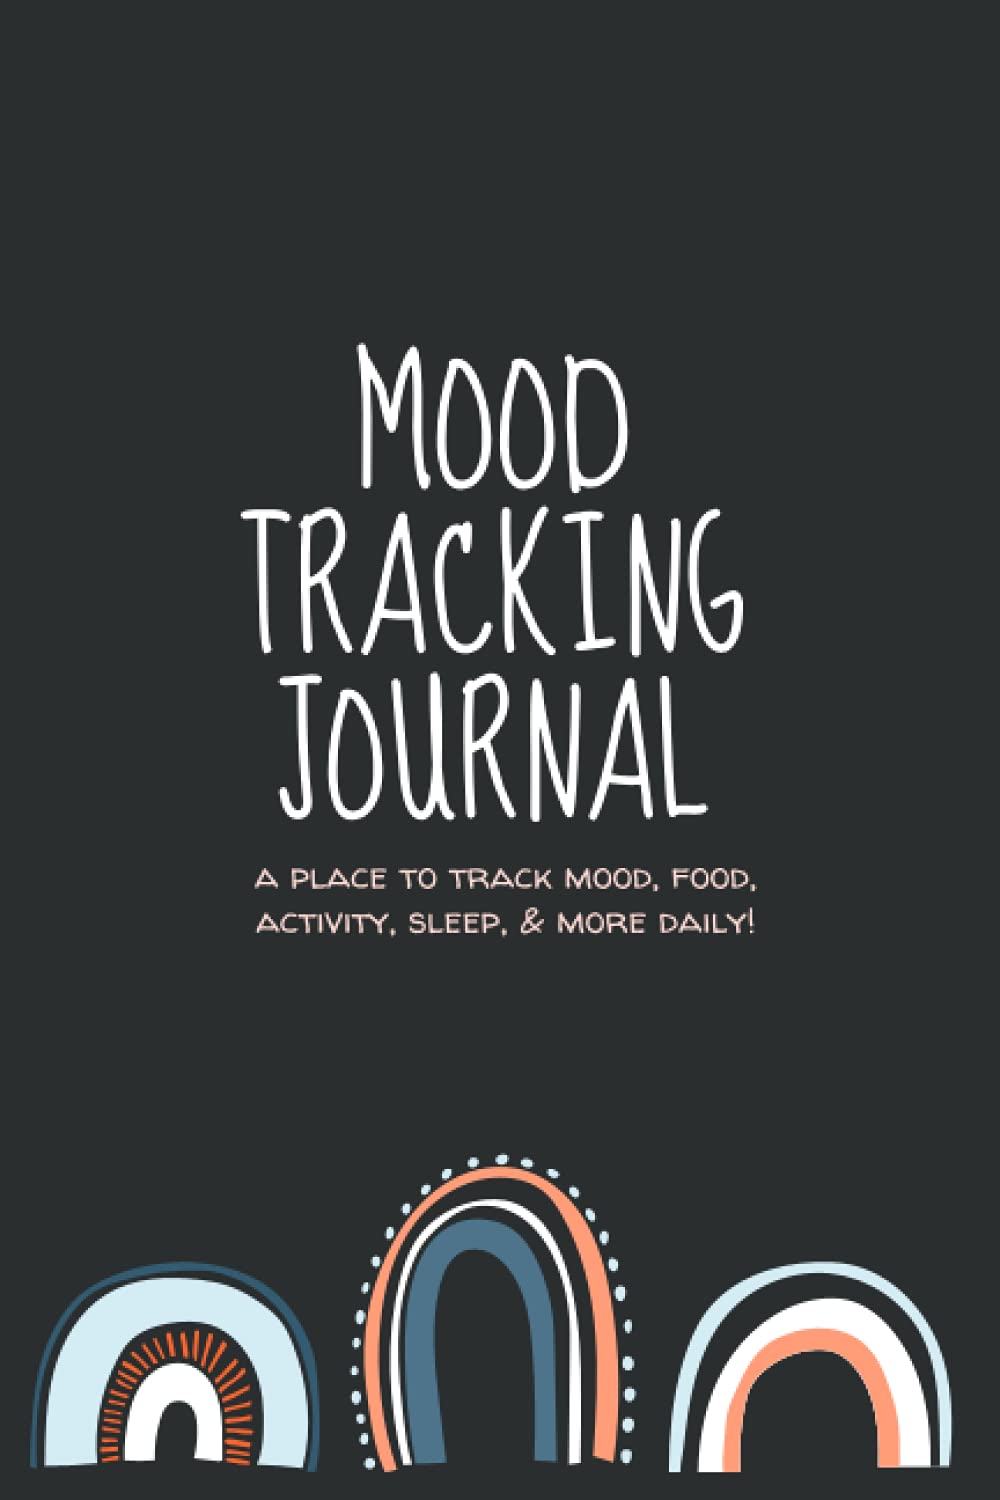 Mood Tracking Journal: Daily Mood Notebook  Mental Health Tracker | Track Mood, Food, Activity, Sleep,  More     Paperback – September 5, 2021